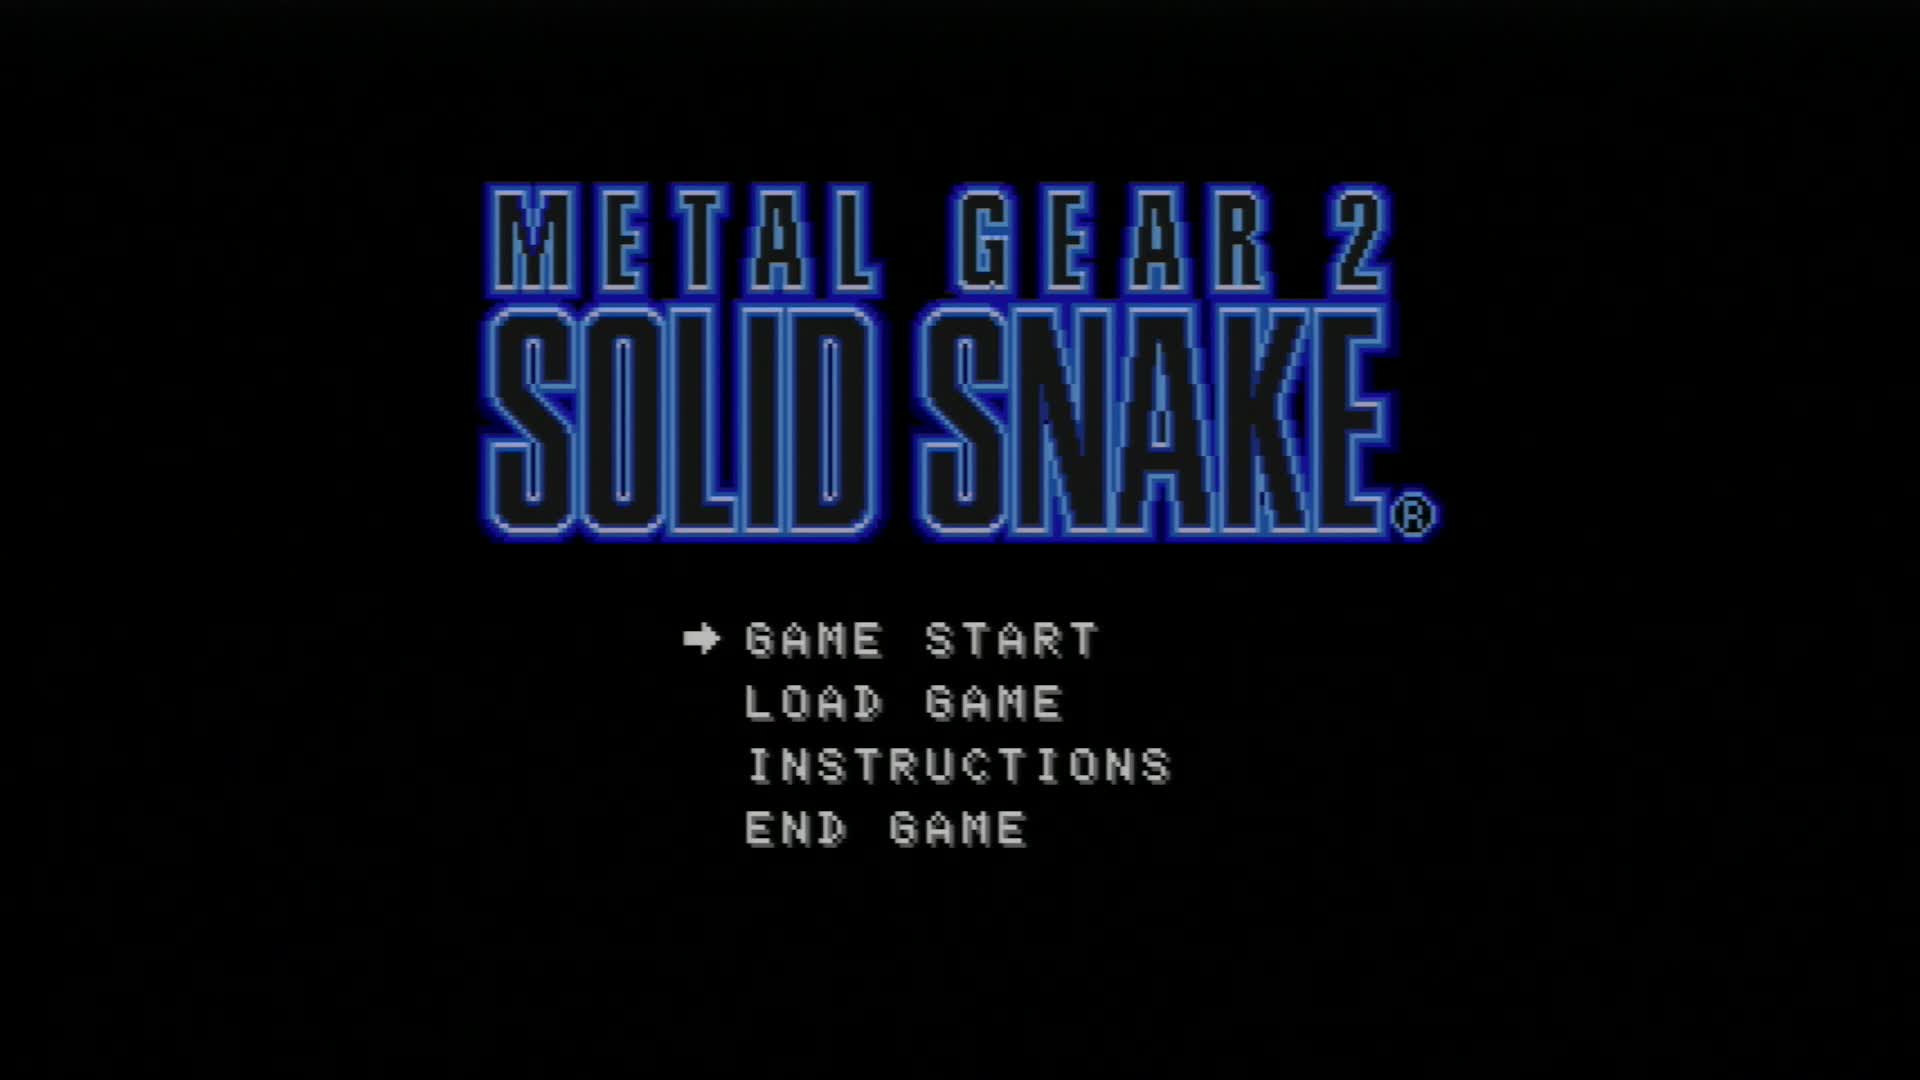 MetalGear2 SOLID SNAKE無事クリア！感想レビューその他諸々